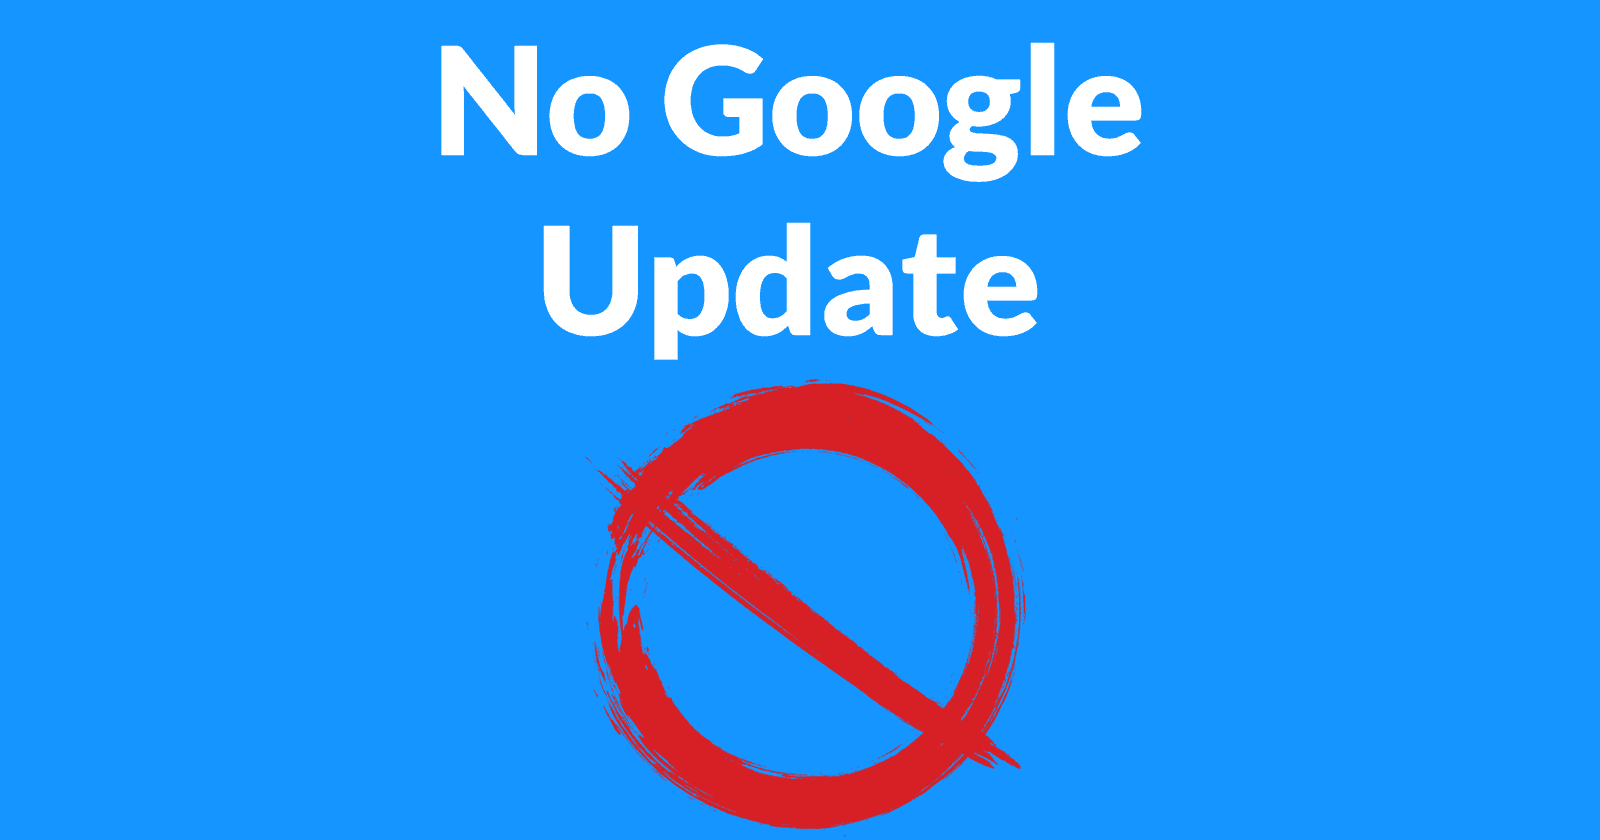 Image of a circle with a slash through it, the symbol and sign of no or prohibition. And the words No Google Update.